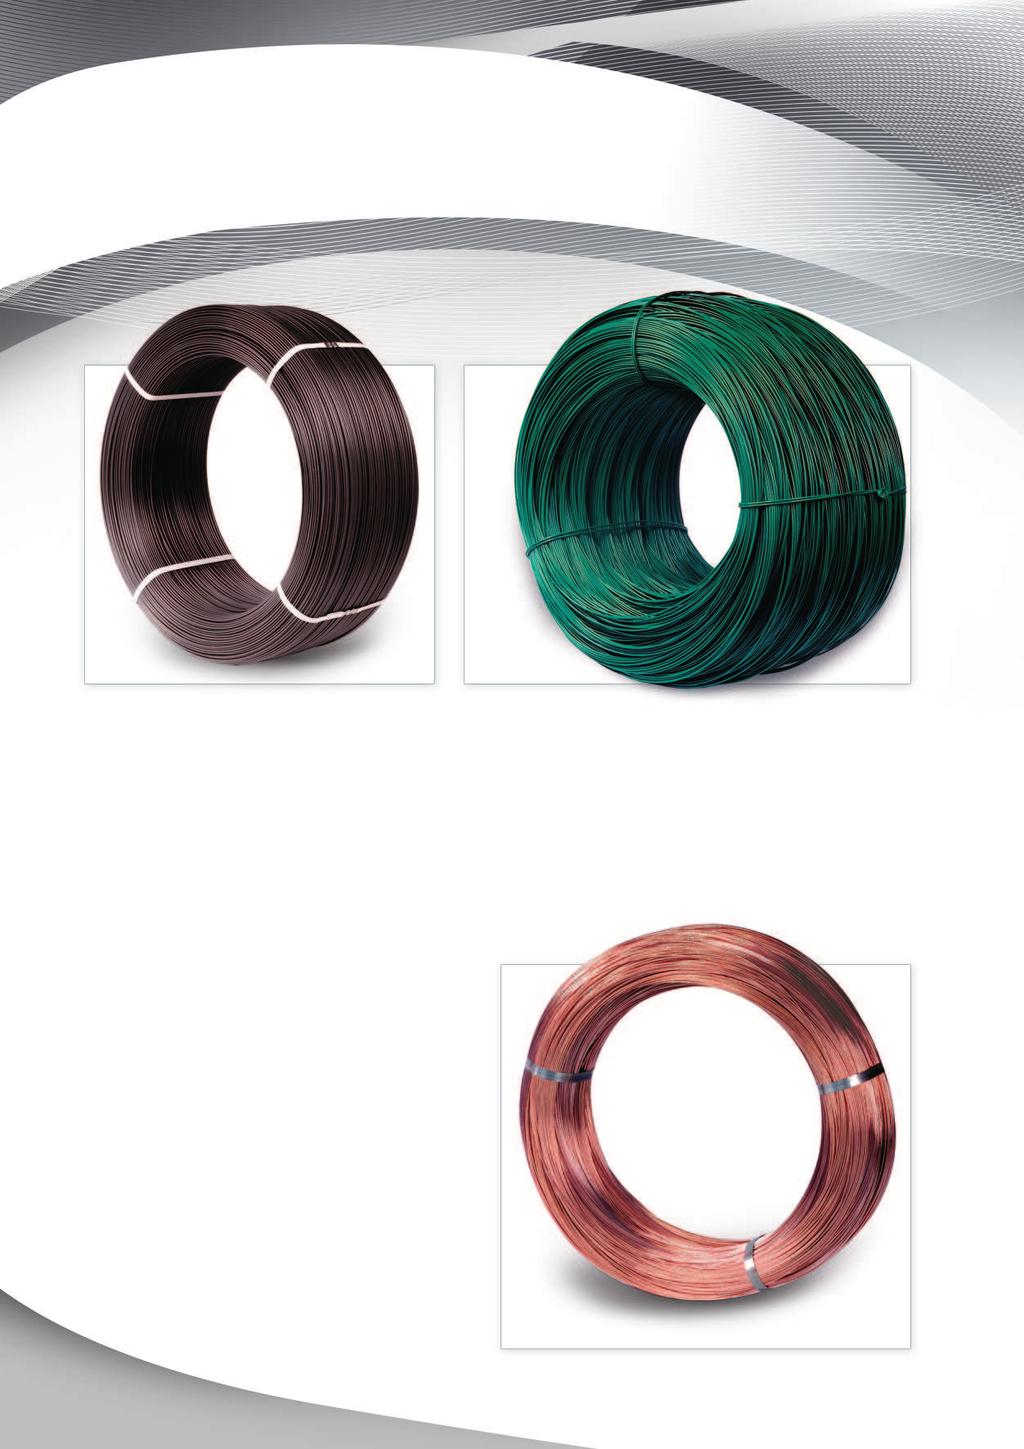 COATED WIRES PVC coated wires CORE DIAMETER WIRE DIAMETER AFTER COATING RANGE OF WEIGHT COLOUR TYPE OF PACKAGING Ø 1,50 mm Ø 3,80 mm Ø 2,50 mm Ø 5,00 mm pick-up coils to 80 kg or rosettes up to 100